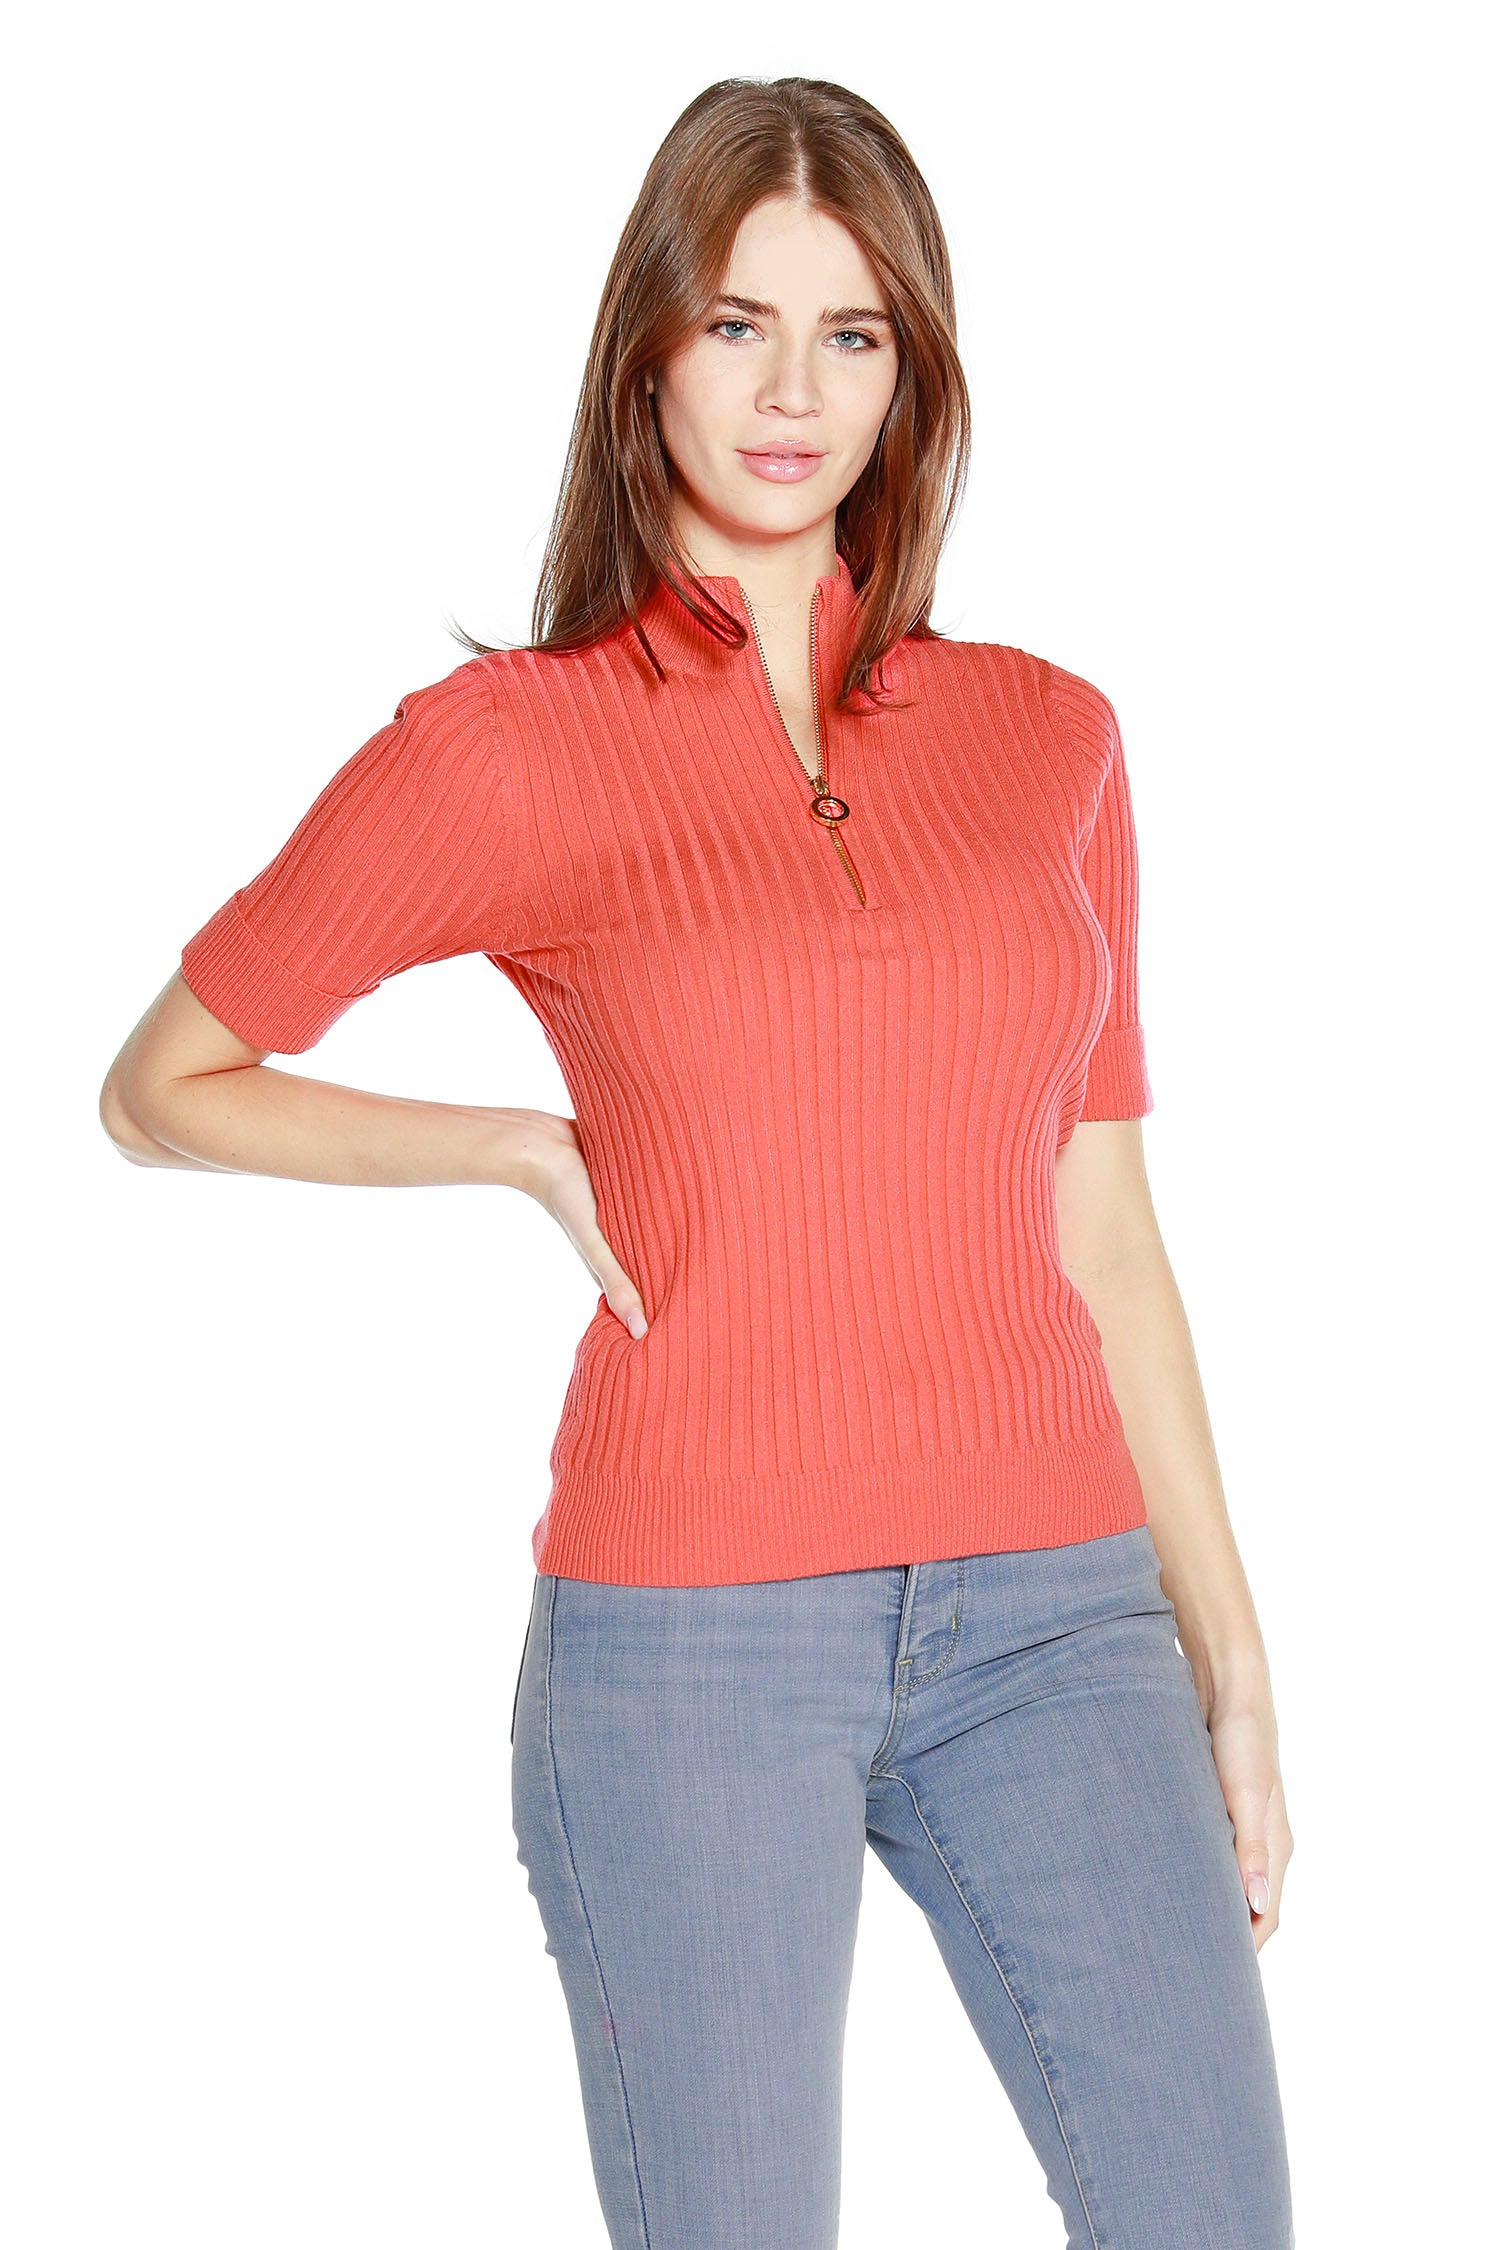 NEW COLORS Women's Pullover Sweater Top with Front Quarter Zip in a Ribbed Knit